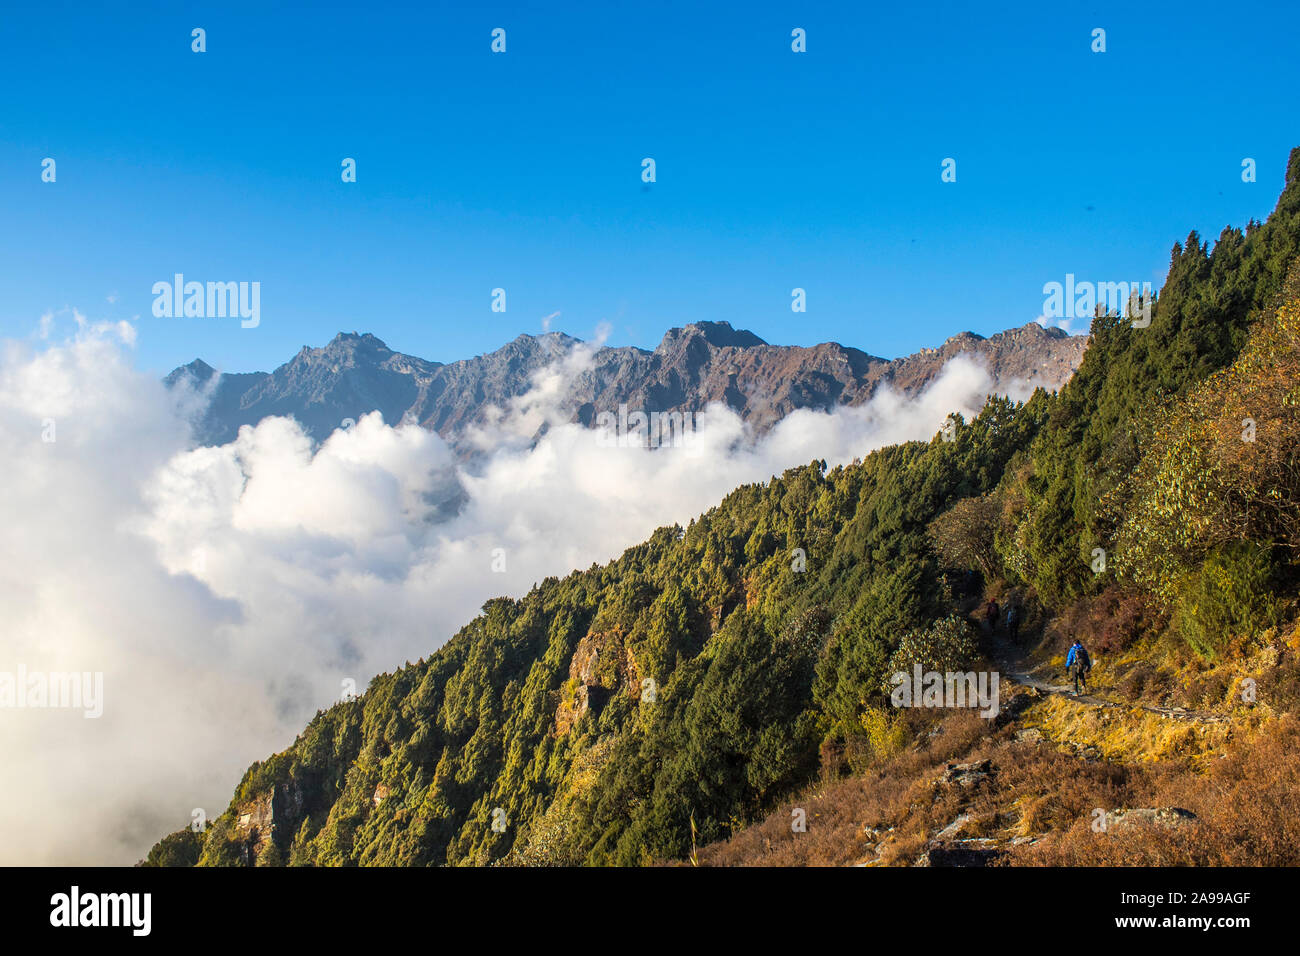 The majestic himalayan mountain range rising above the jungle making a fantastic view together with low lying clouds in Thatepati. Stock Photo